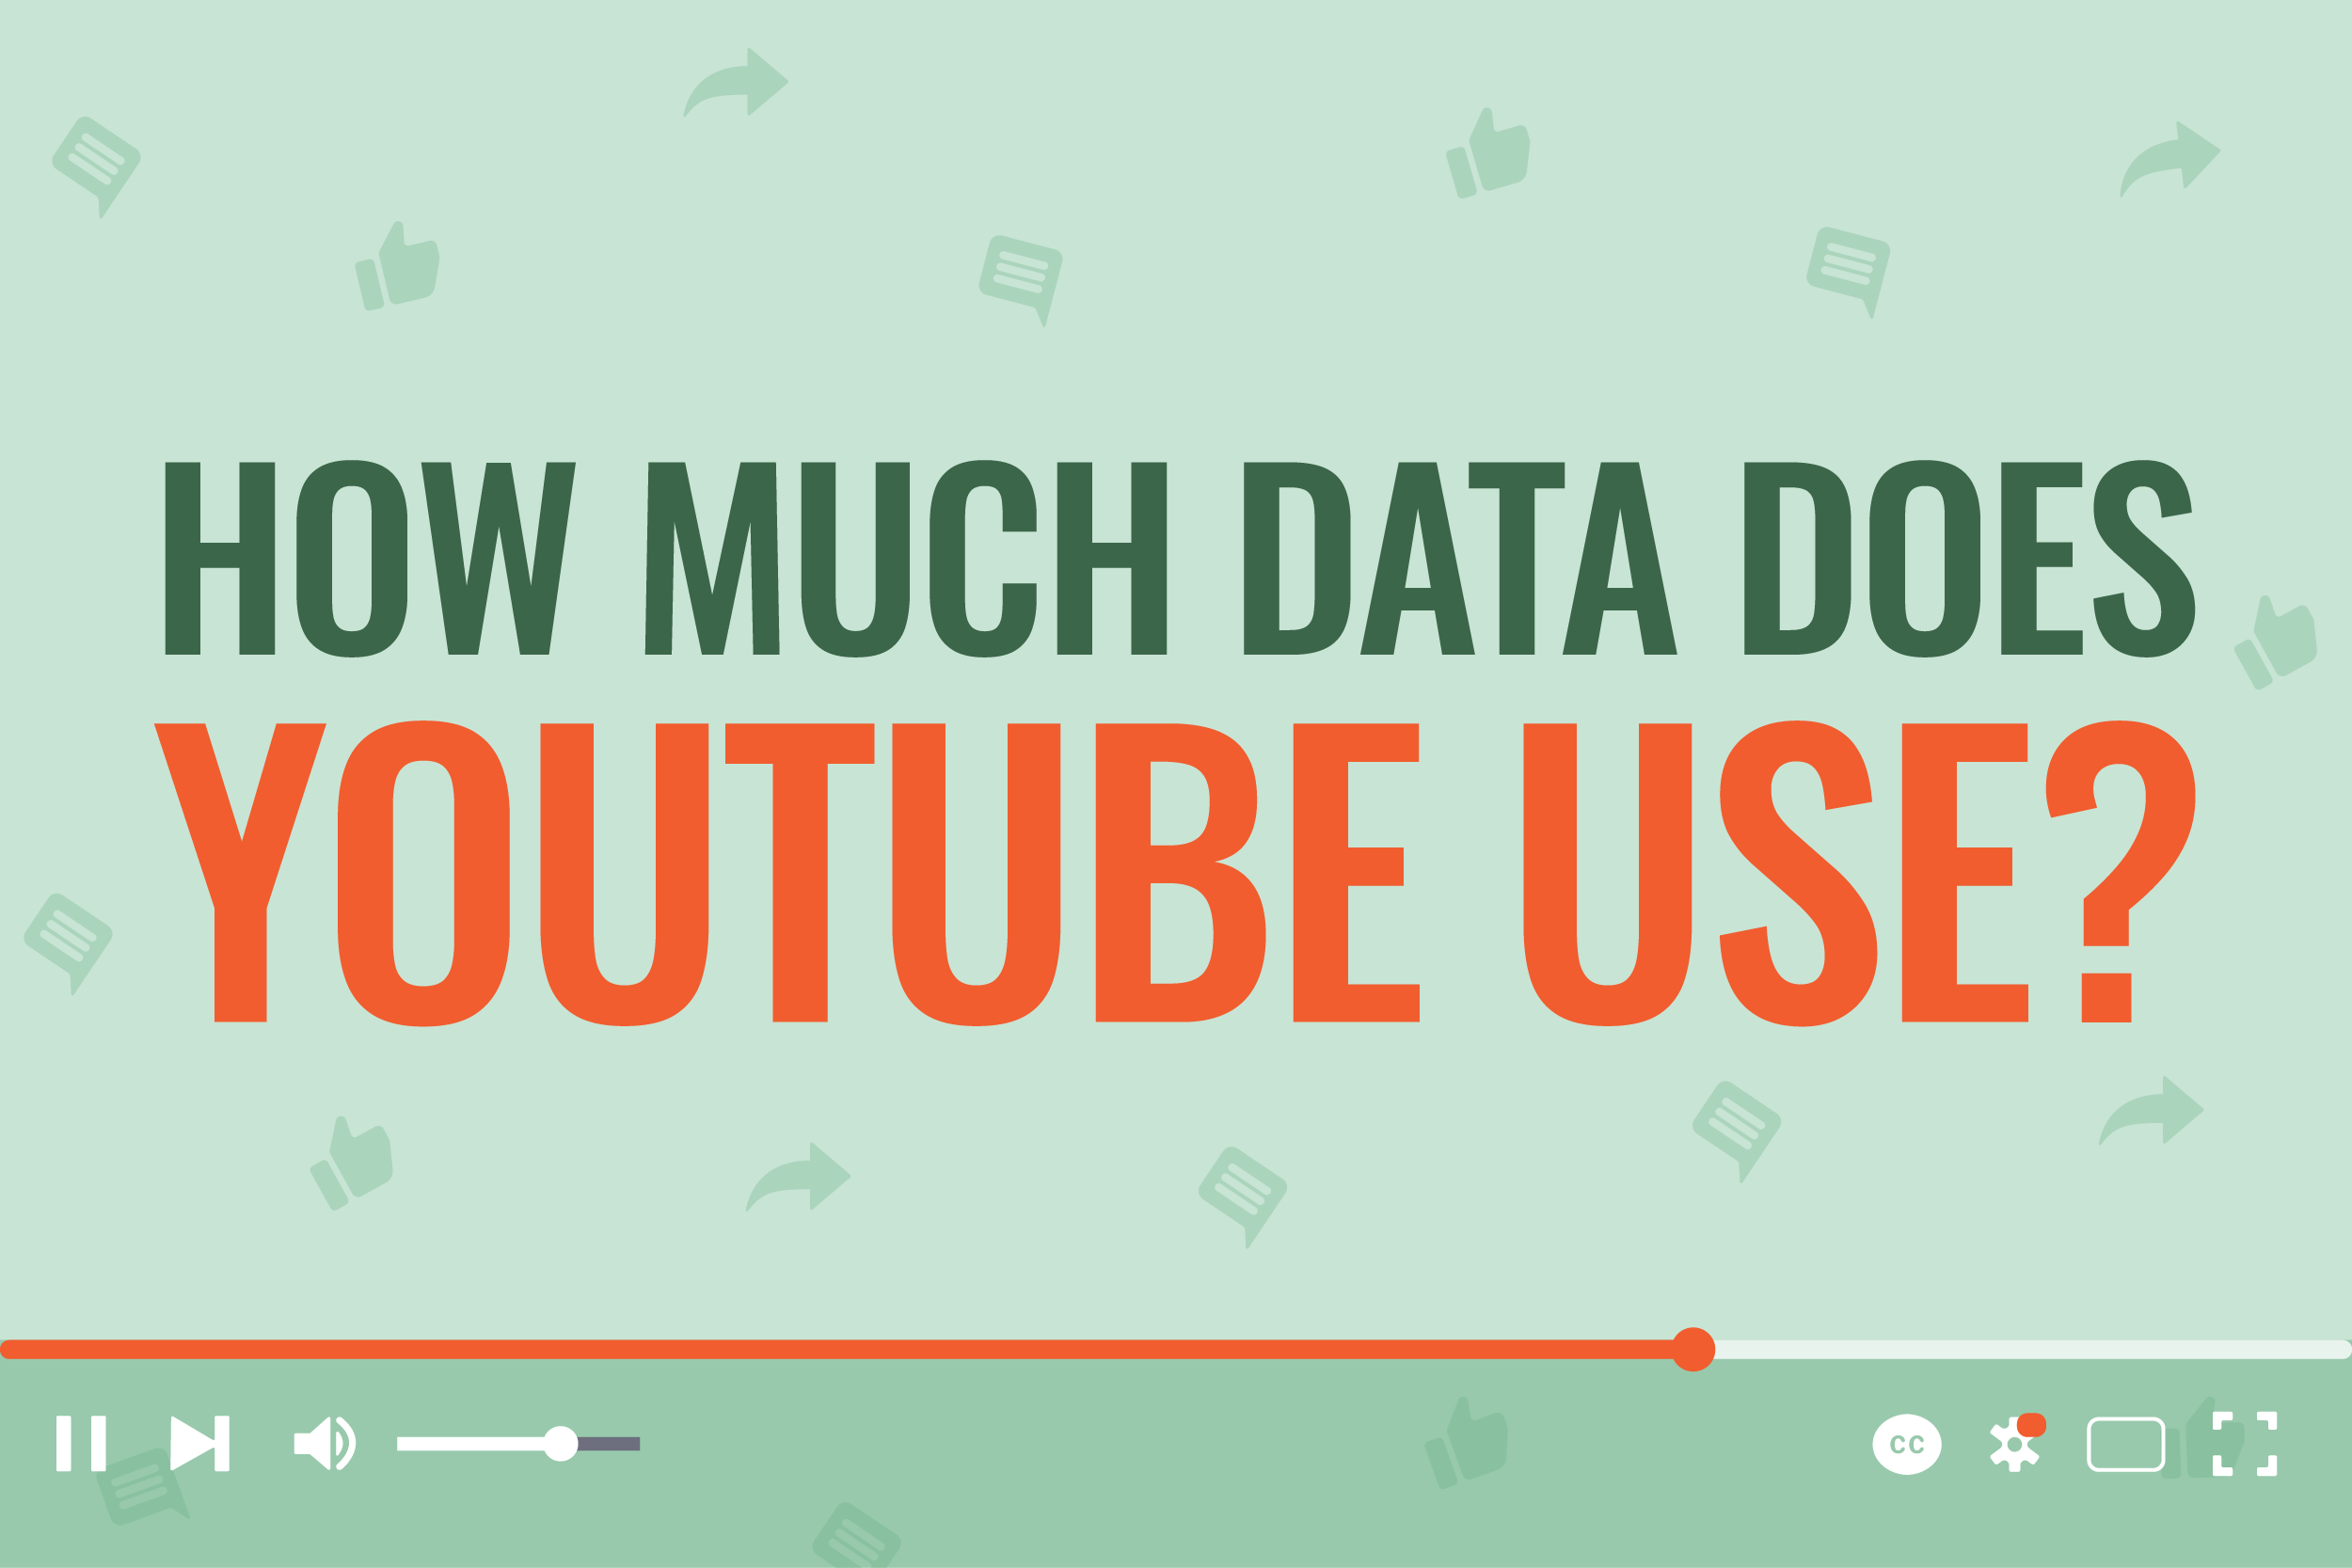 How much data does YouTube use?